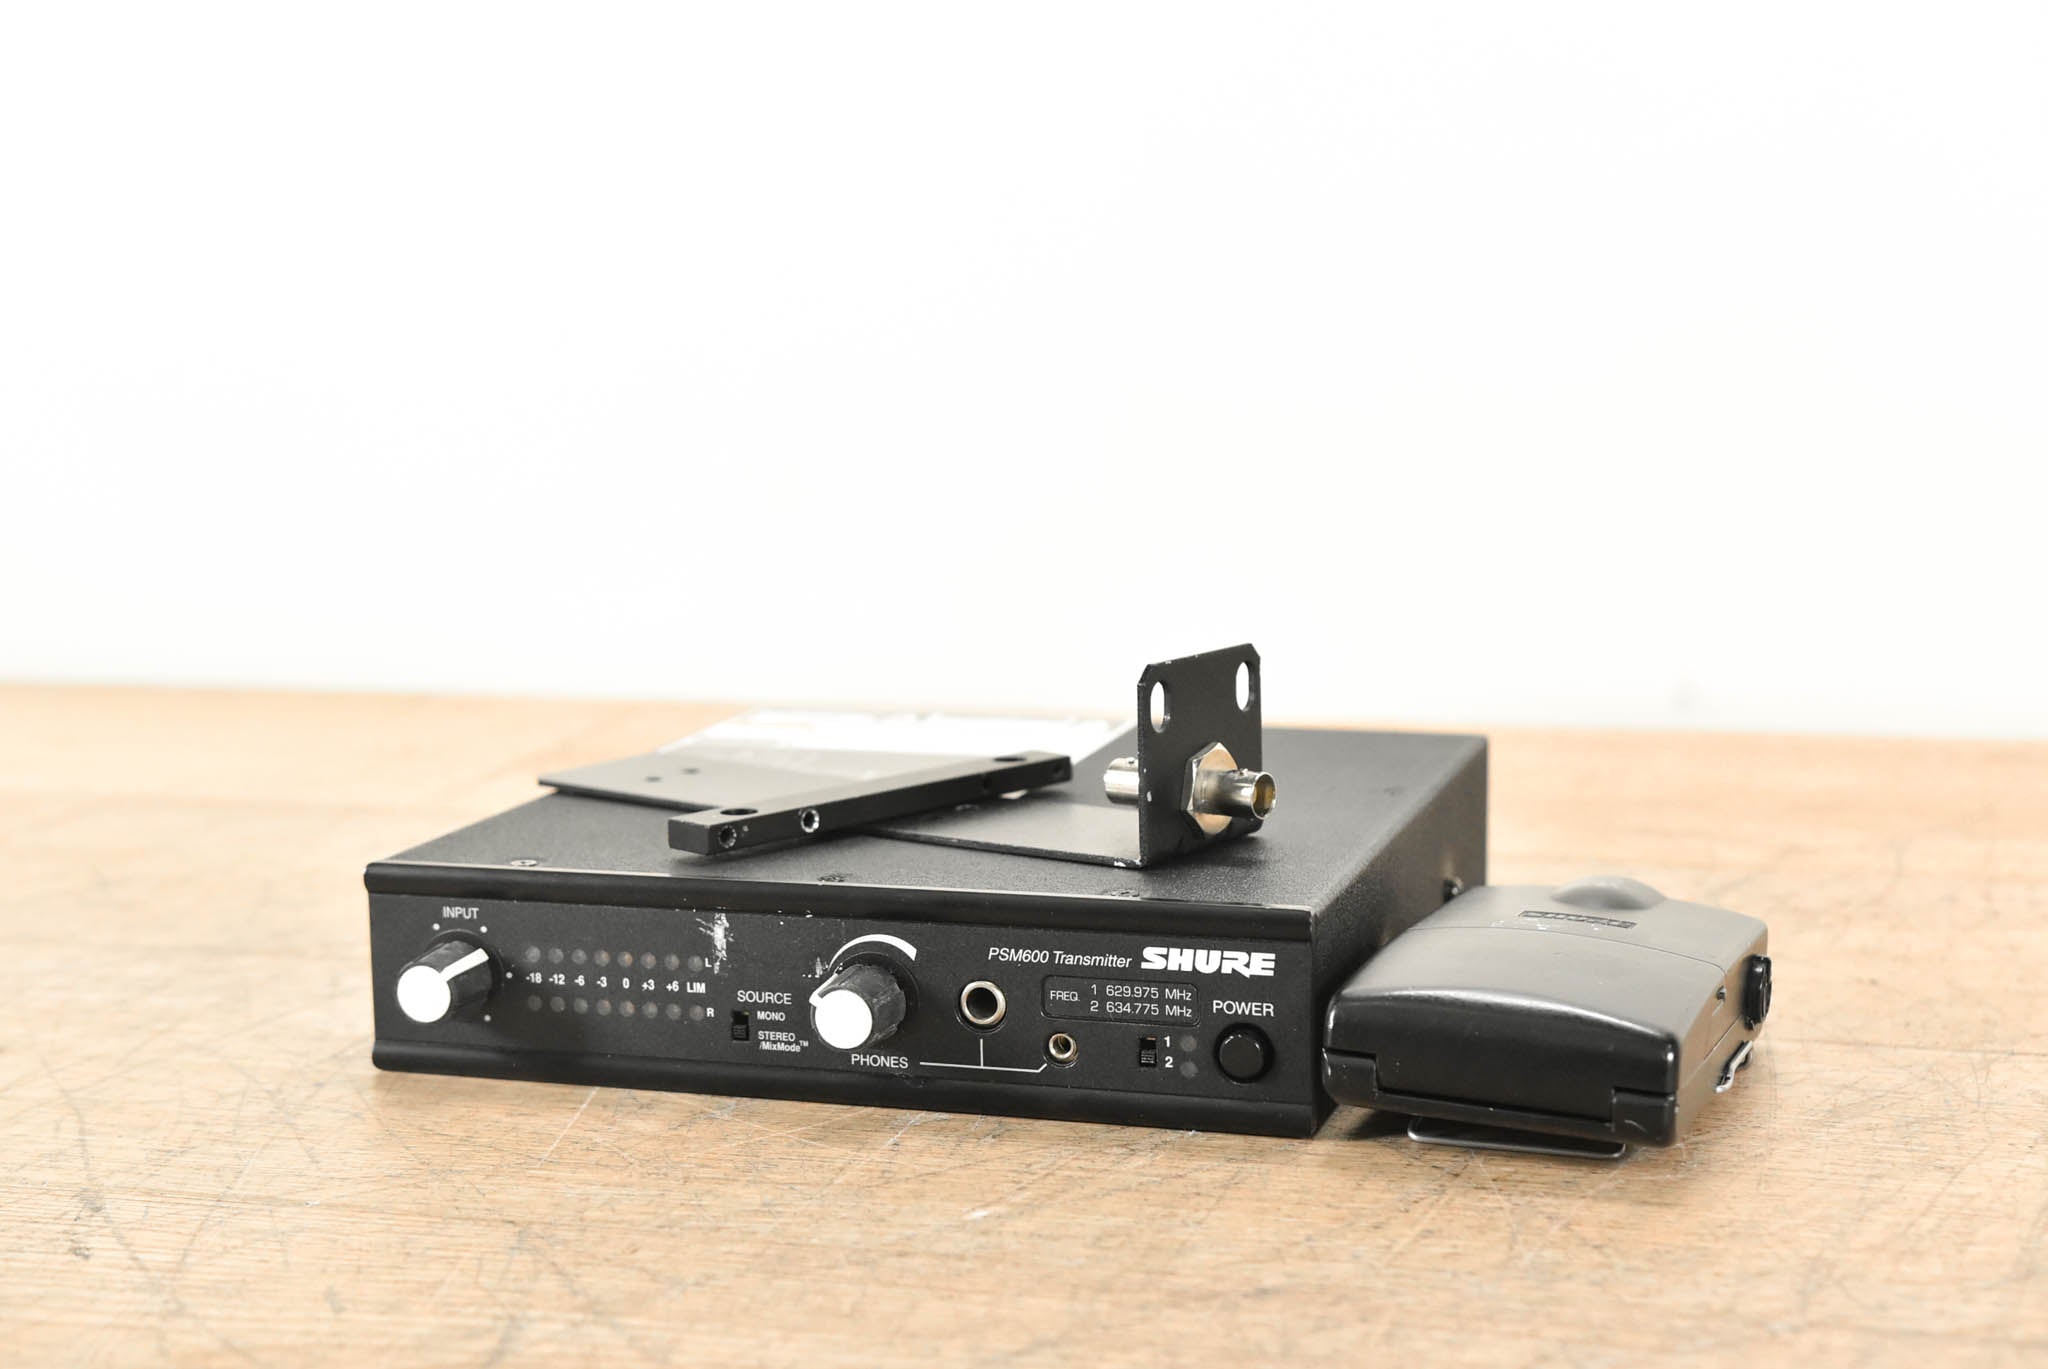 Shure PSM600 Wireless In-Ear Monitoring System - 629.975 and 634.775 MHz